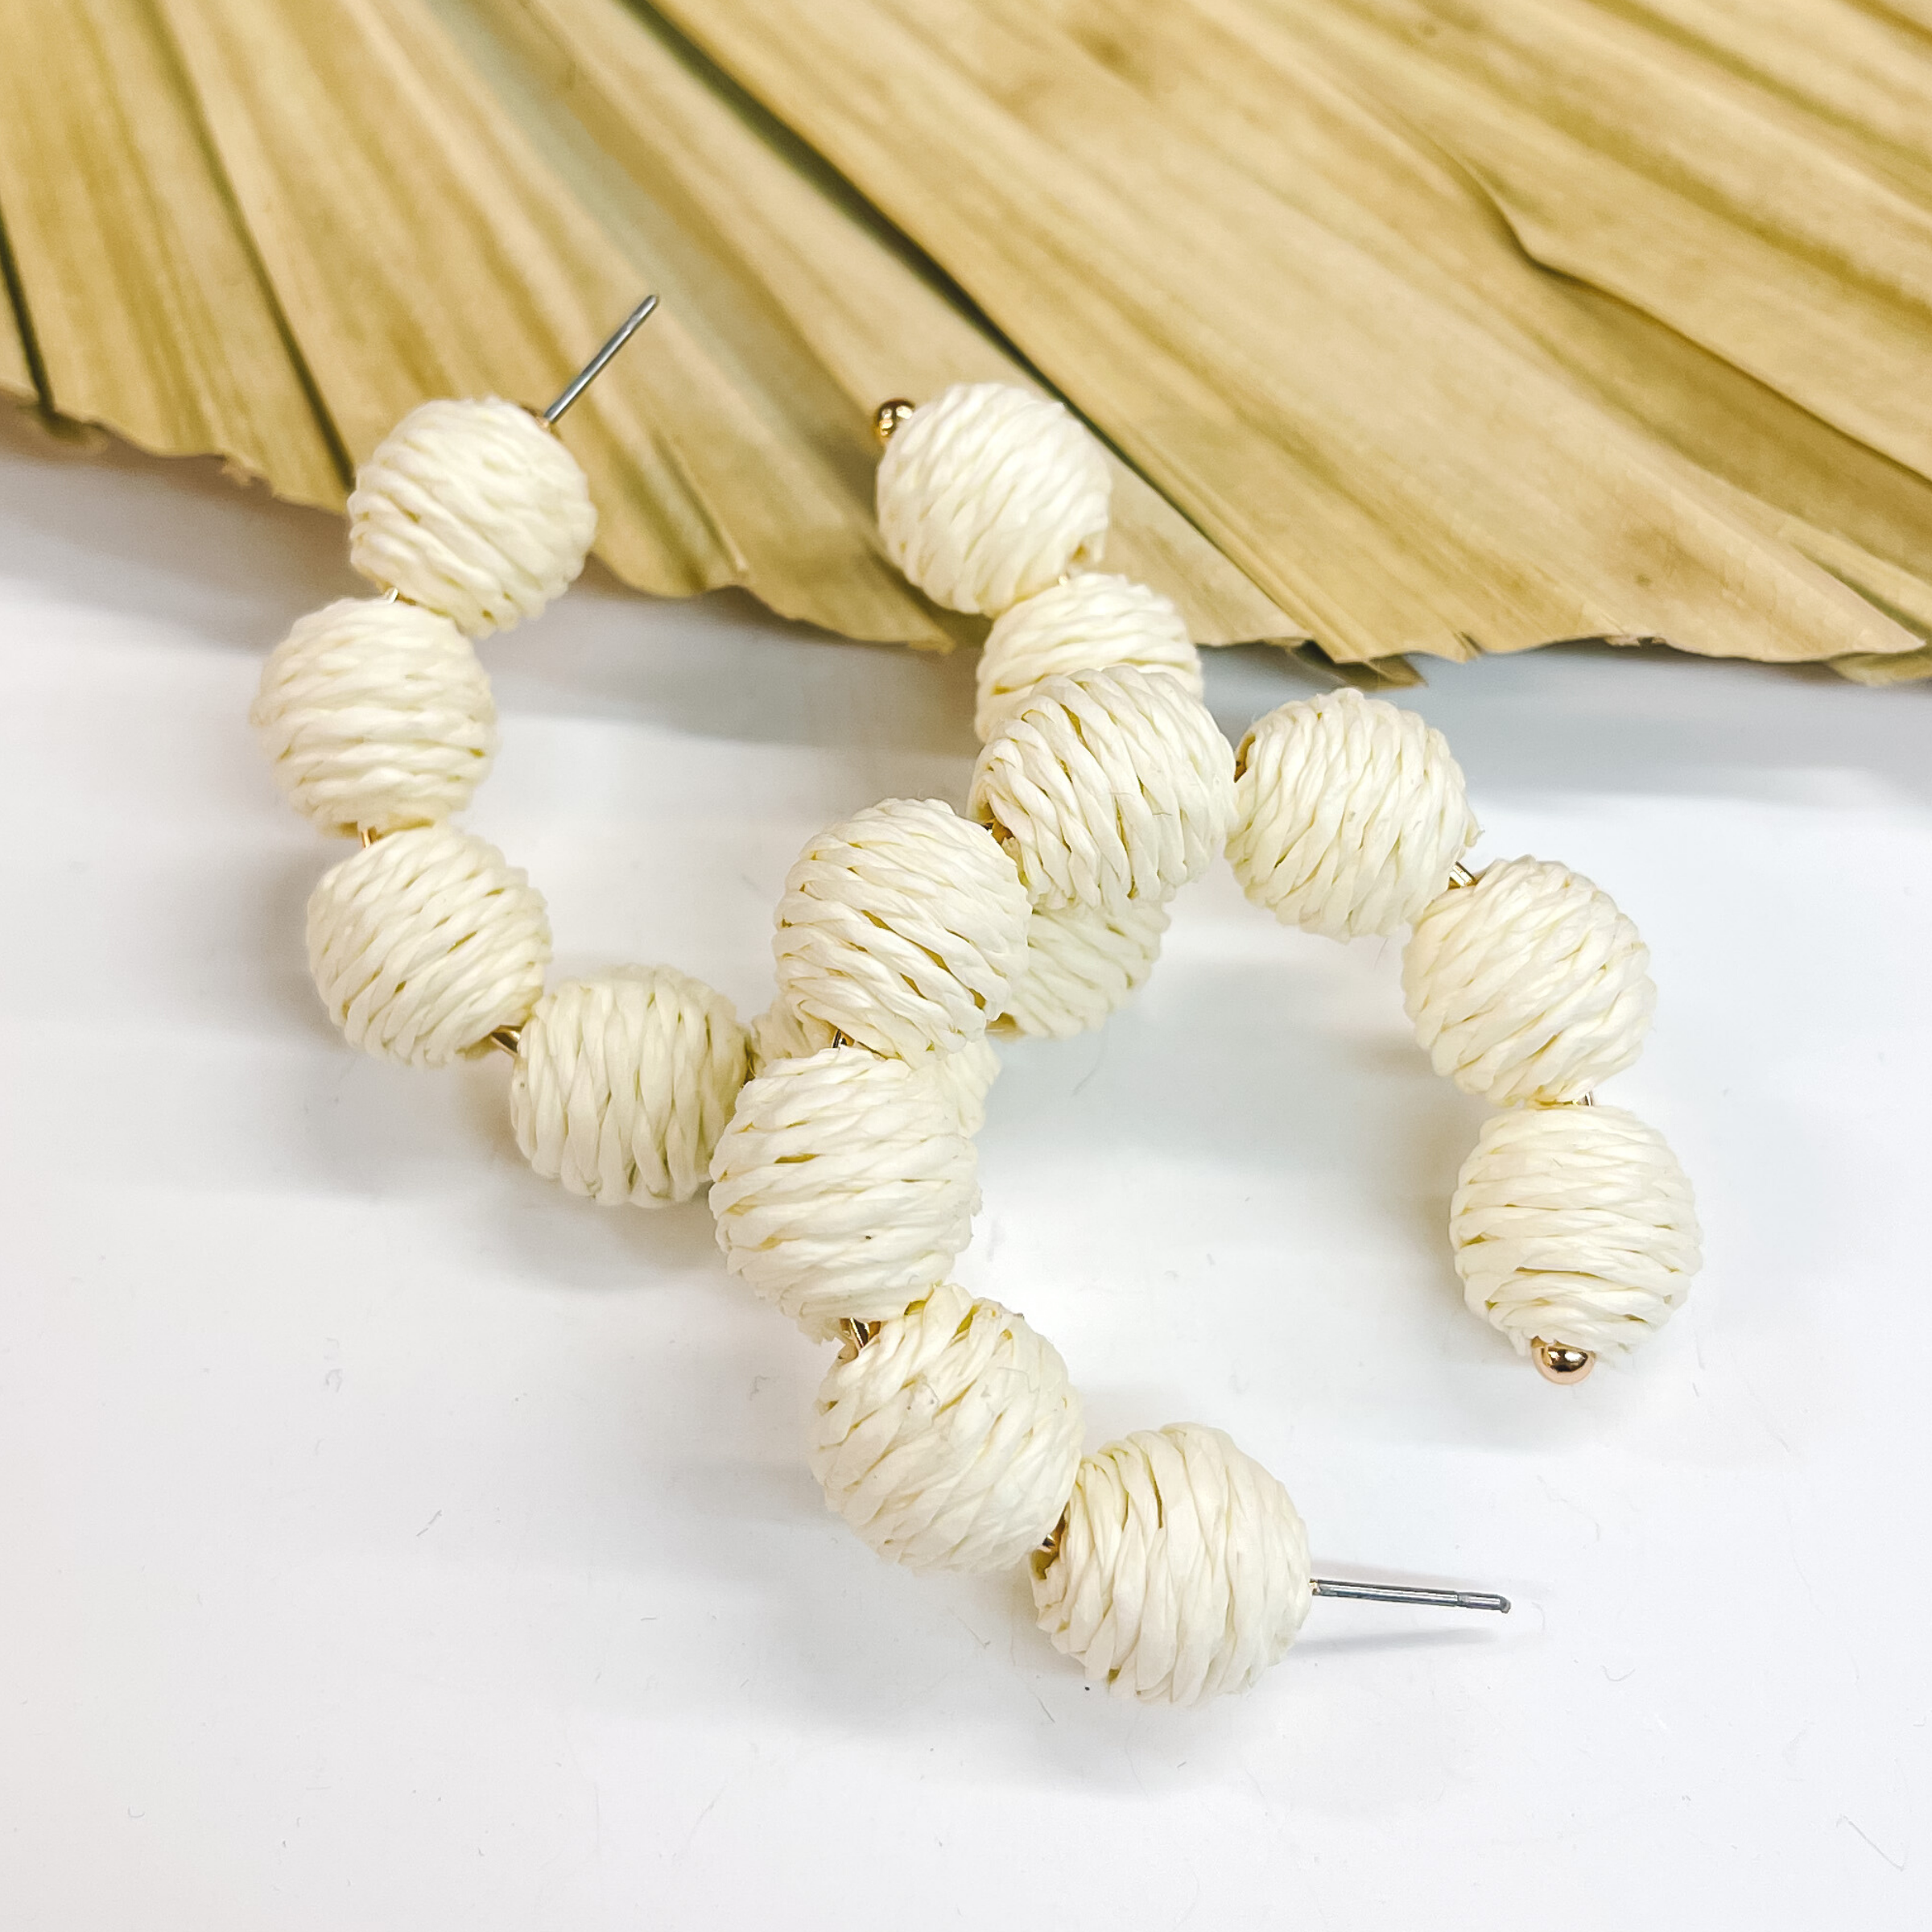 Hoop earrings with raffia balls around. The balls are wrapped in ivory raffia. Taken on a white background and  leaned up against a dried up palm leaf.